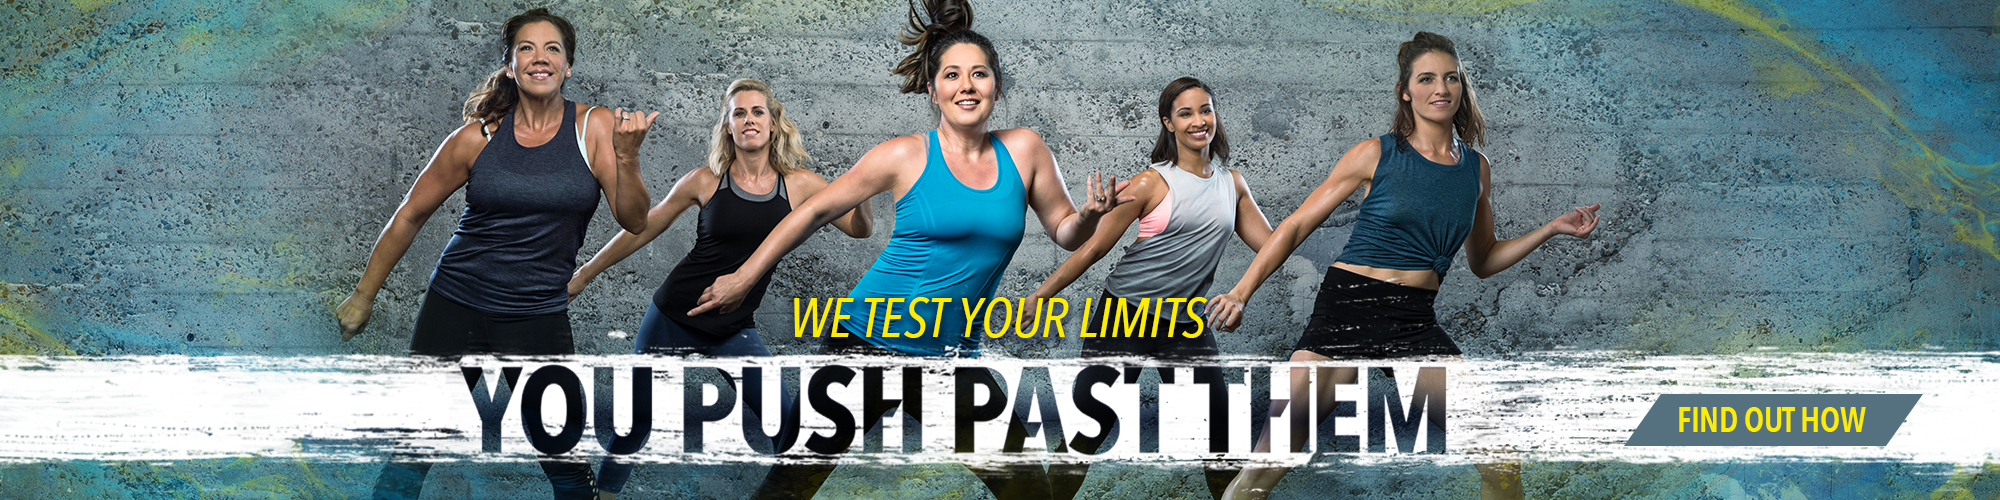 We Test Your Limits